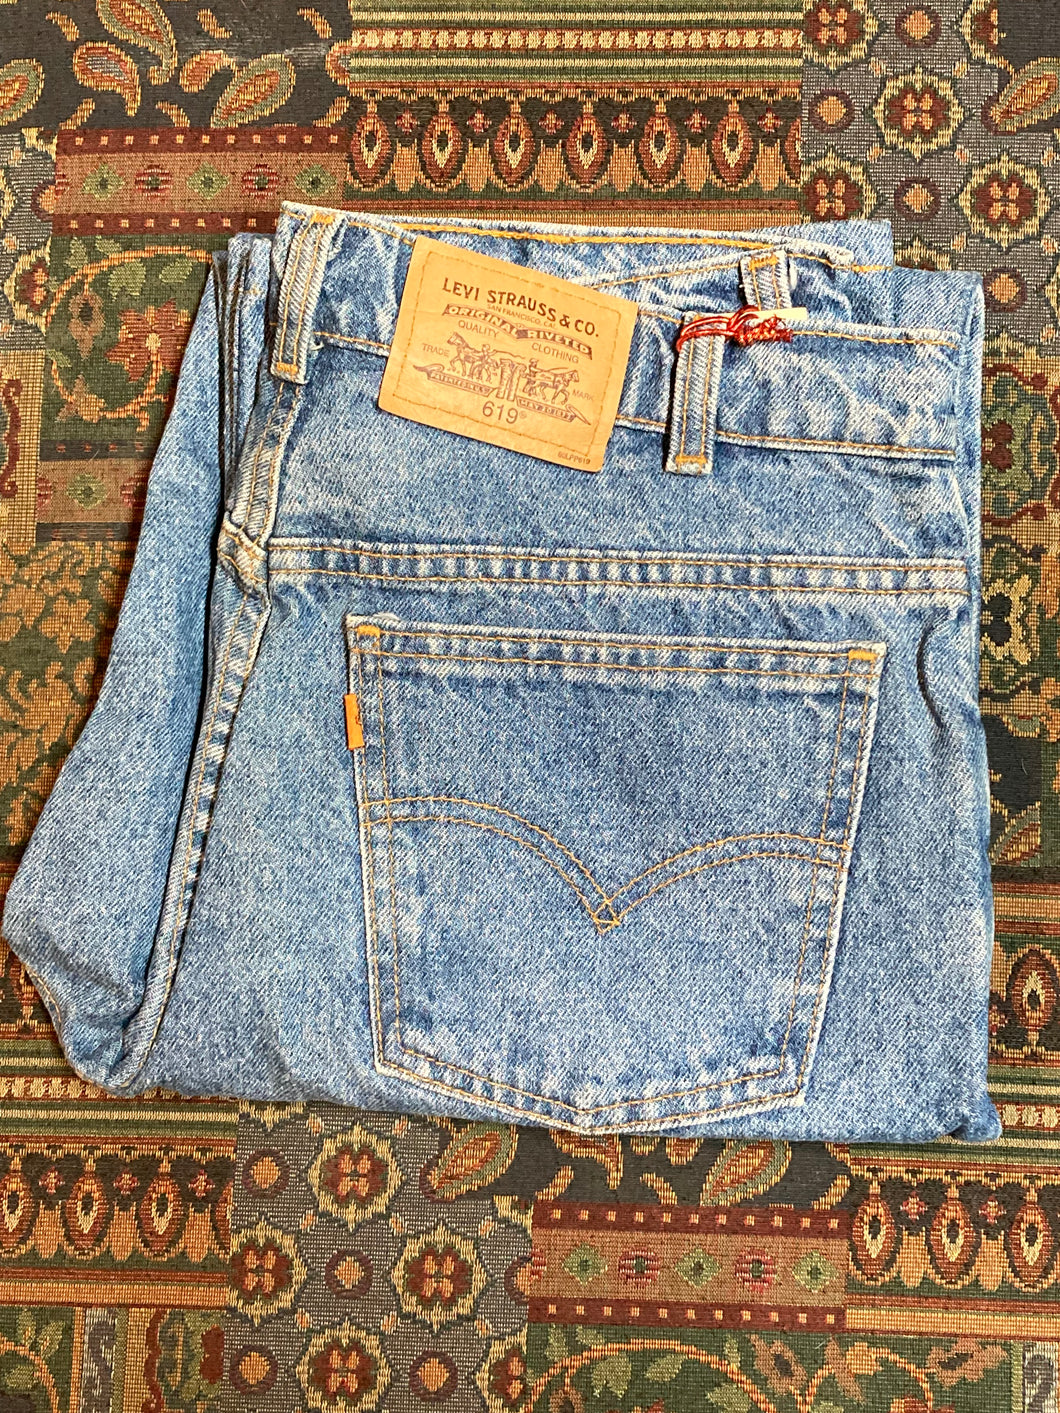 Levi’s 619 - 32”x31.5” Denim Jeans  Vintage Orange Tab  High rise  Straight cut  100% cotton  Medium wash  Button stamped “212”  Labeled 32”x34” with professionally altered hem  Made in Canada - Kingspier Vintage